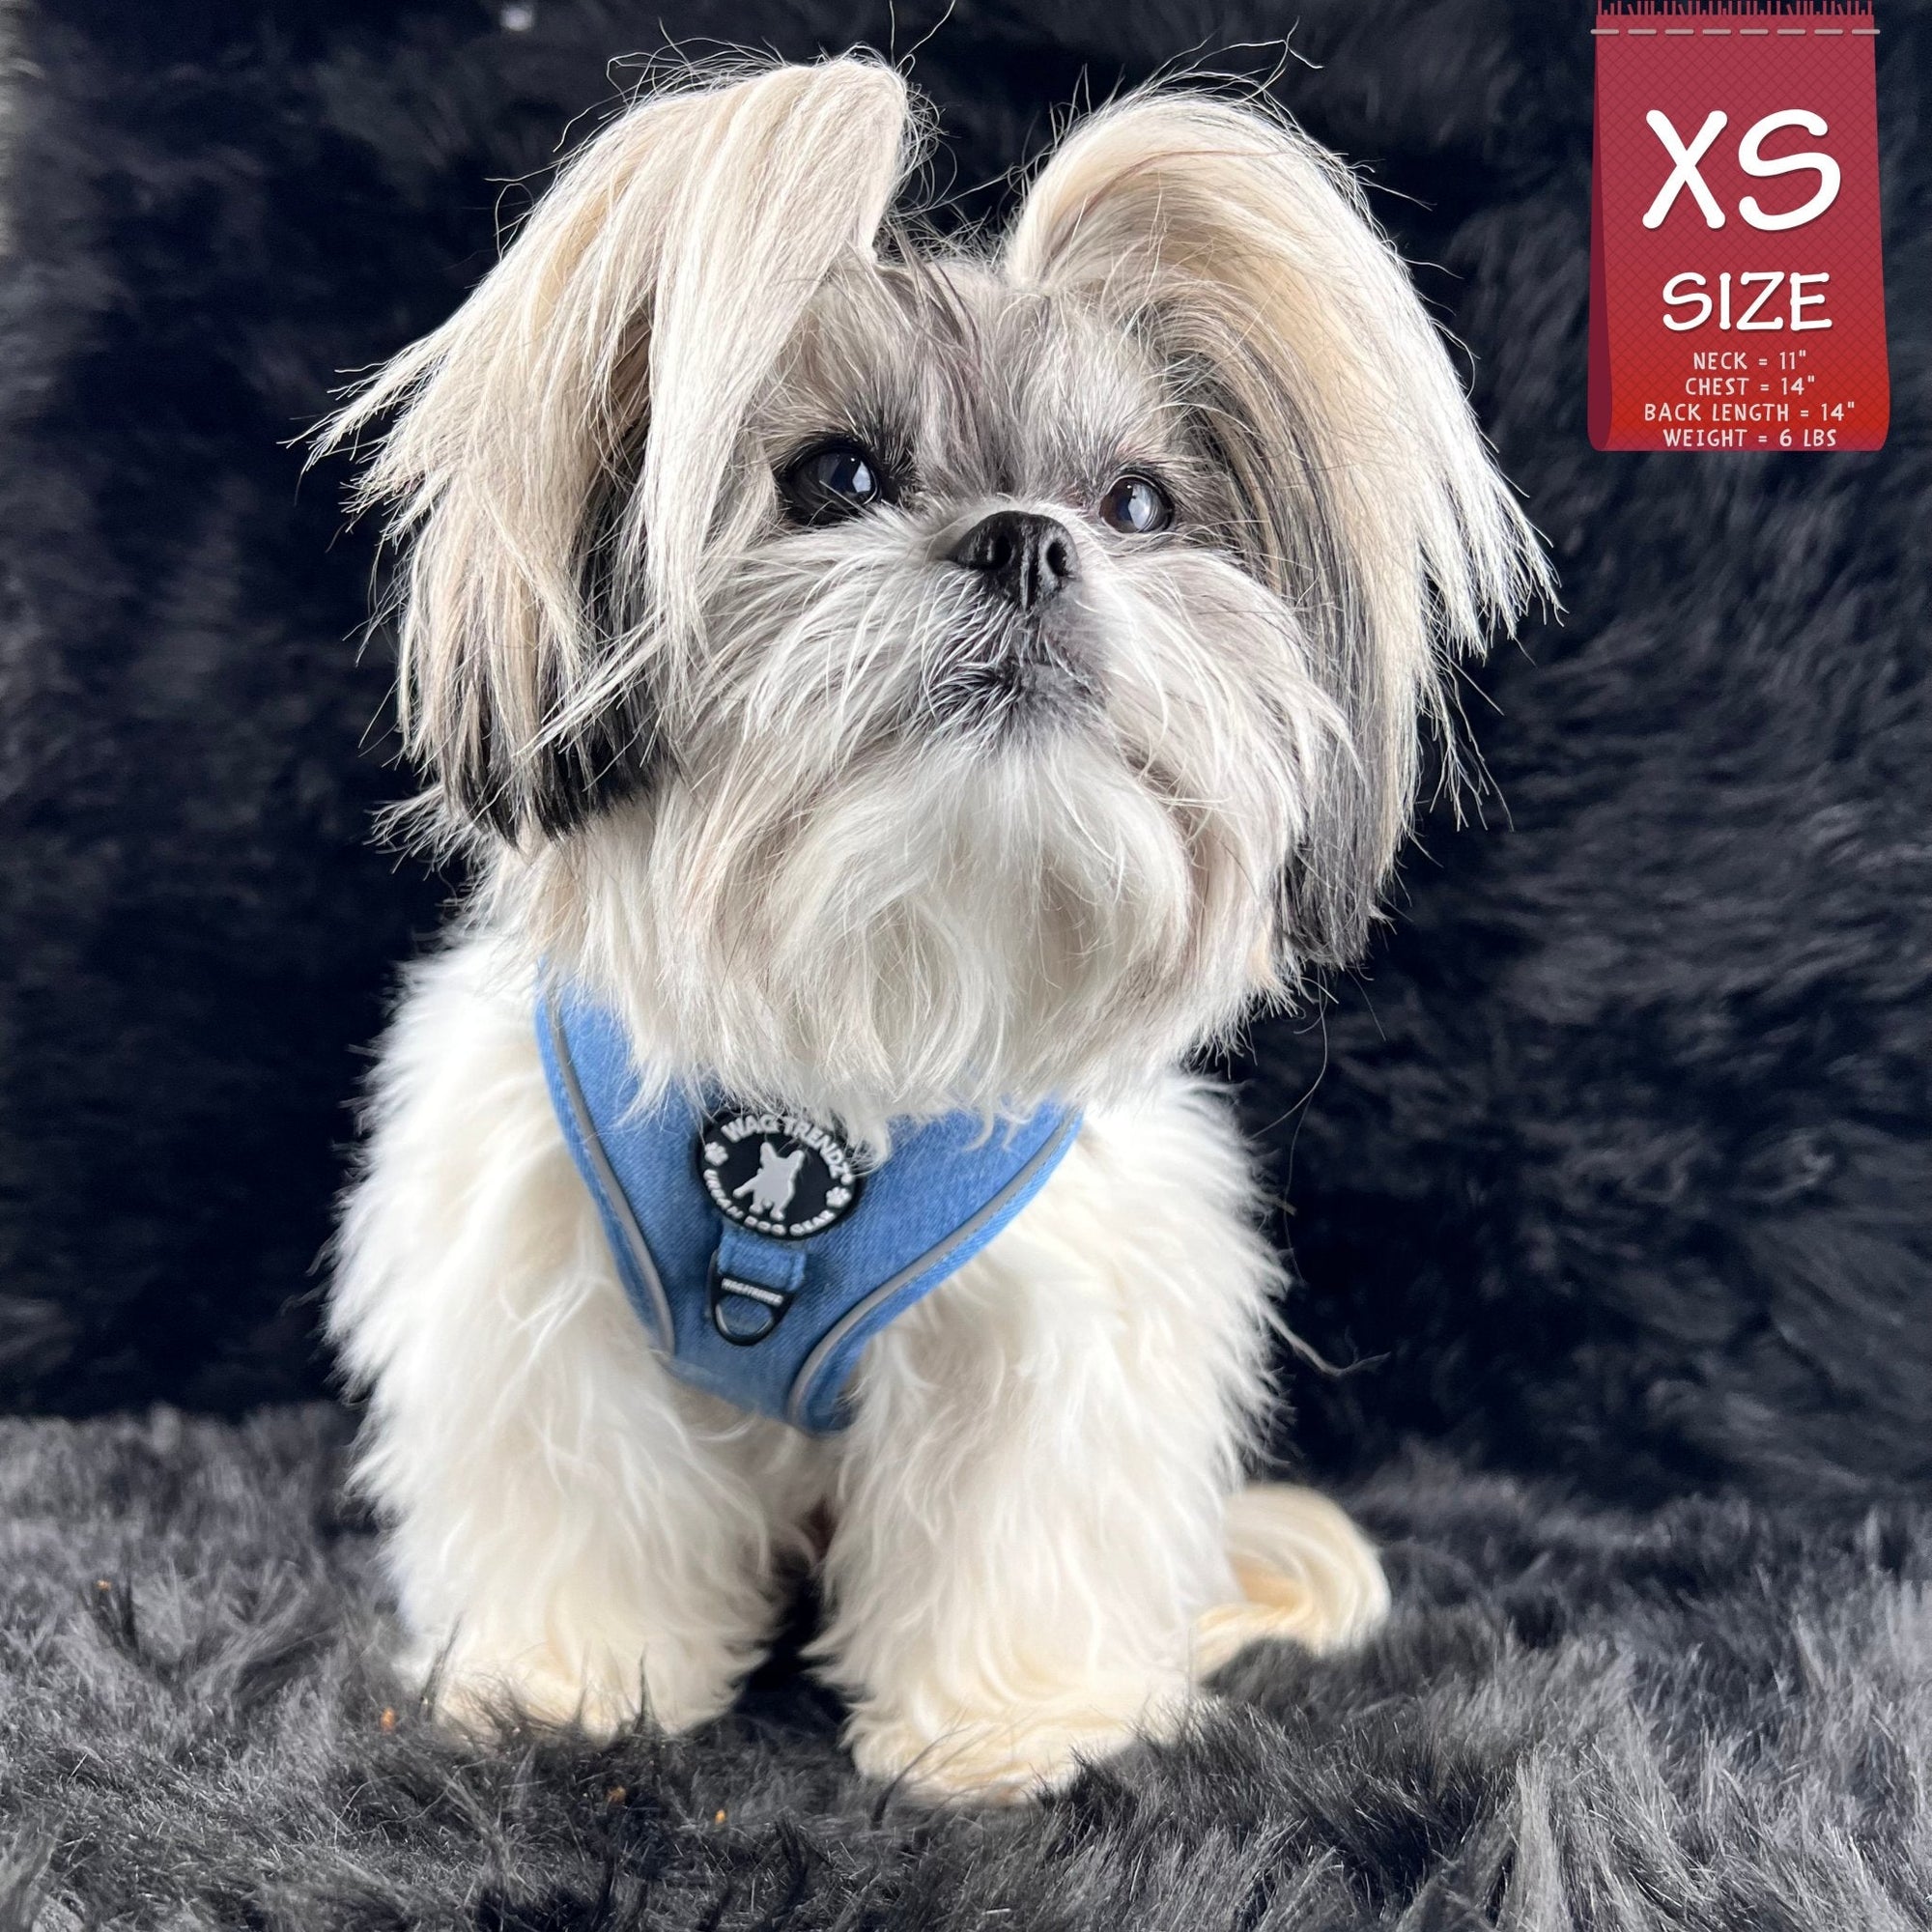 Denim Dog Harness - Reflective and No Pull - Shih Tzu wearing Downtown Denim Dog Harness with reflective accents sitting on a black carpet showing the frontside of the harness - Wag Trendz